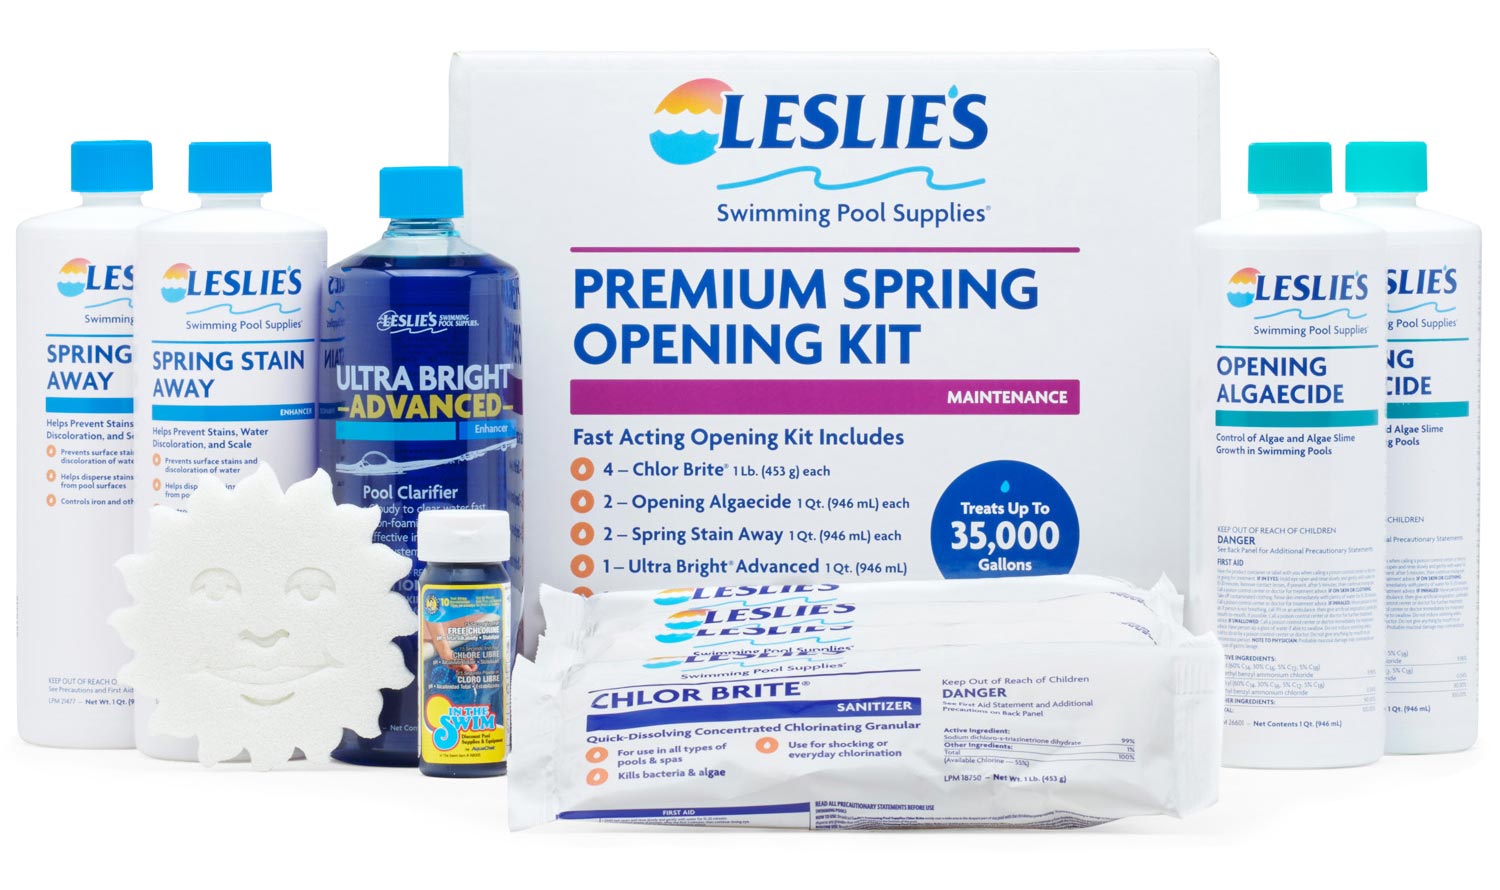 Leslie's Premium Spring Pool Opening Kit Contents